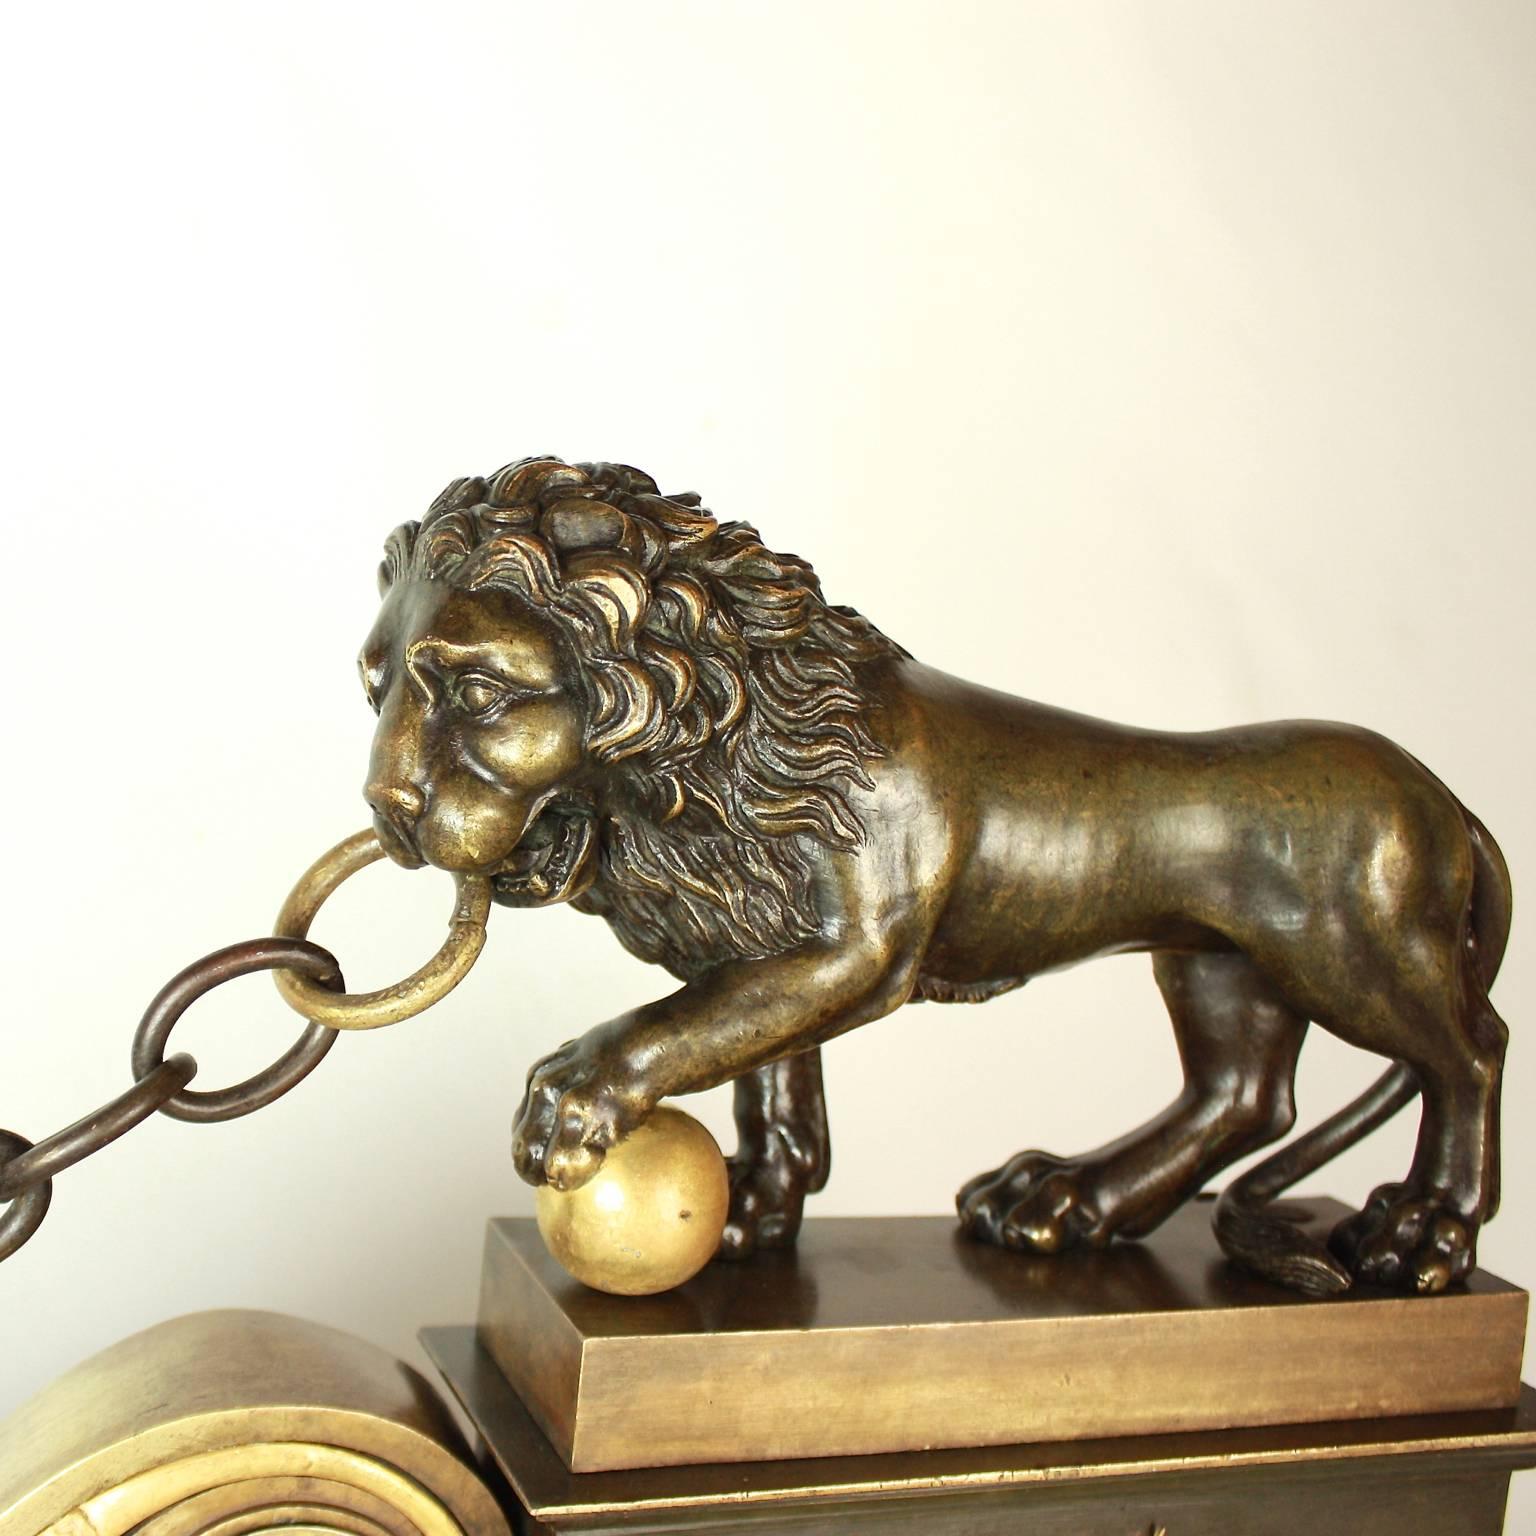 An Empire ormolu and patinated bronze fire fender from the early 19th century, of angular shape depicting the 'Medici Lions' over a stepped plinth. Both Lions are holding on to a chain with a ball under one paw, looking to the side. The mounts